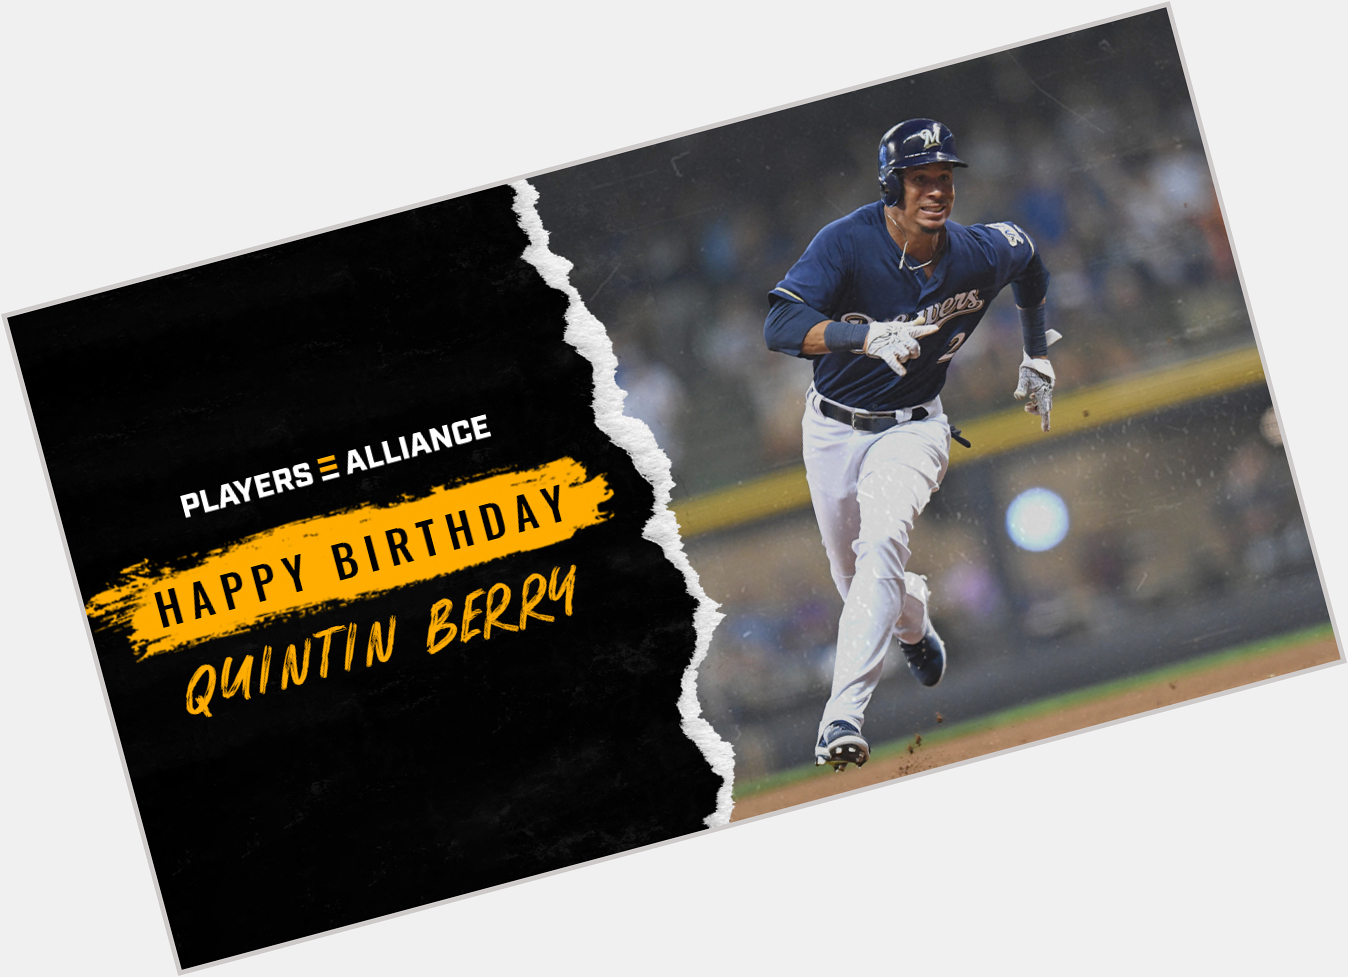 Wishing a very happy birthday to Quintin Berry 